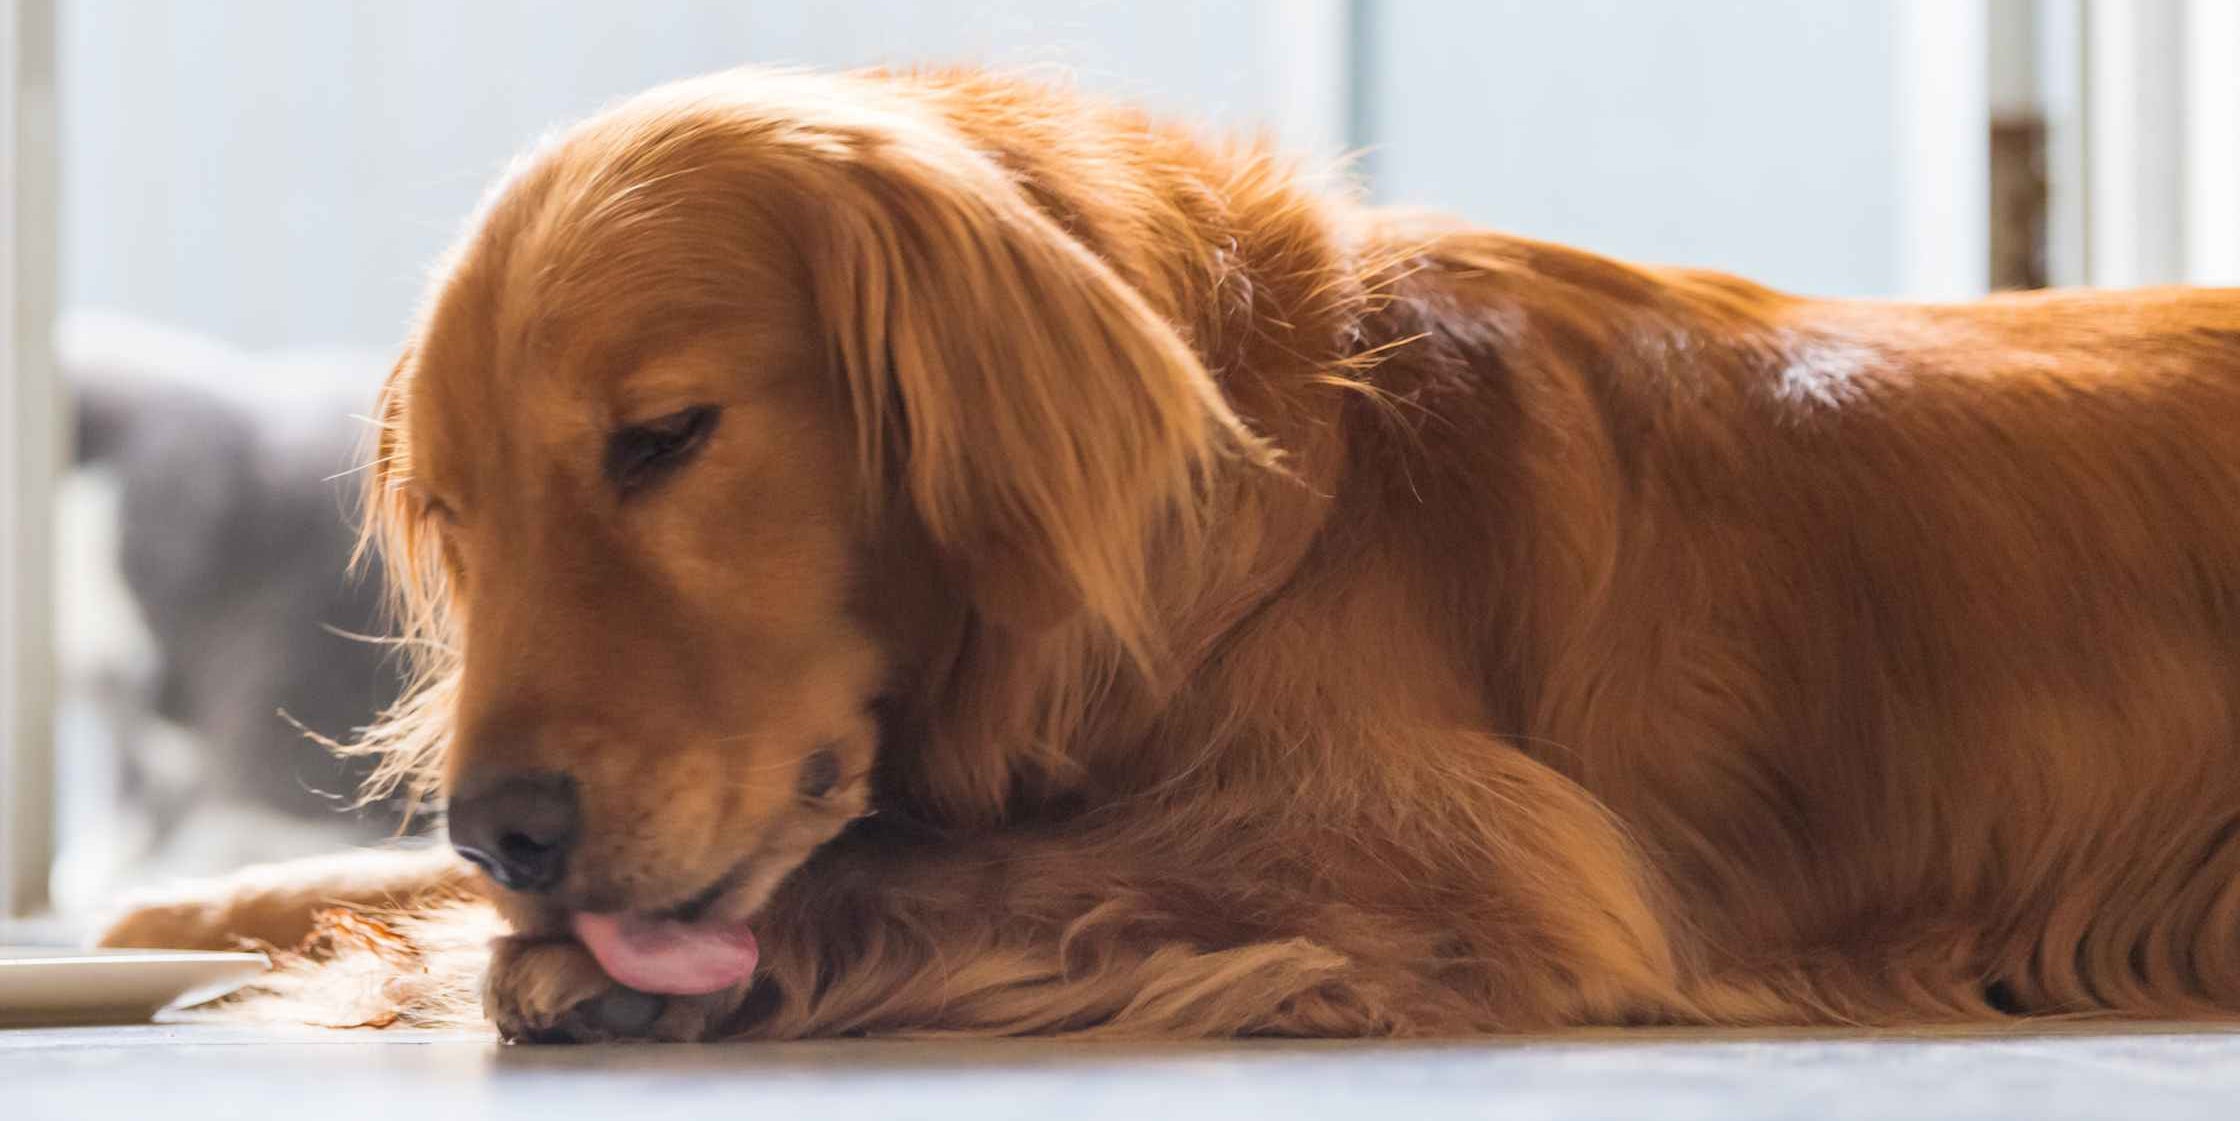 Dog licking Paws - How to Recognise Dog Anxiety Symptoms by PetWell